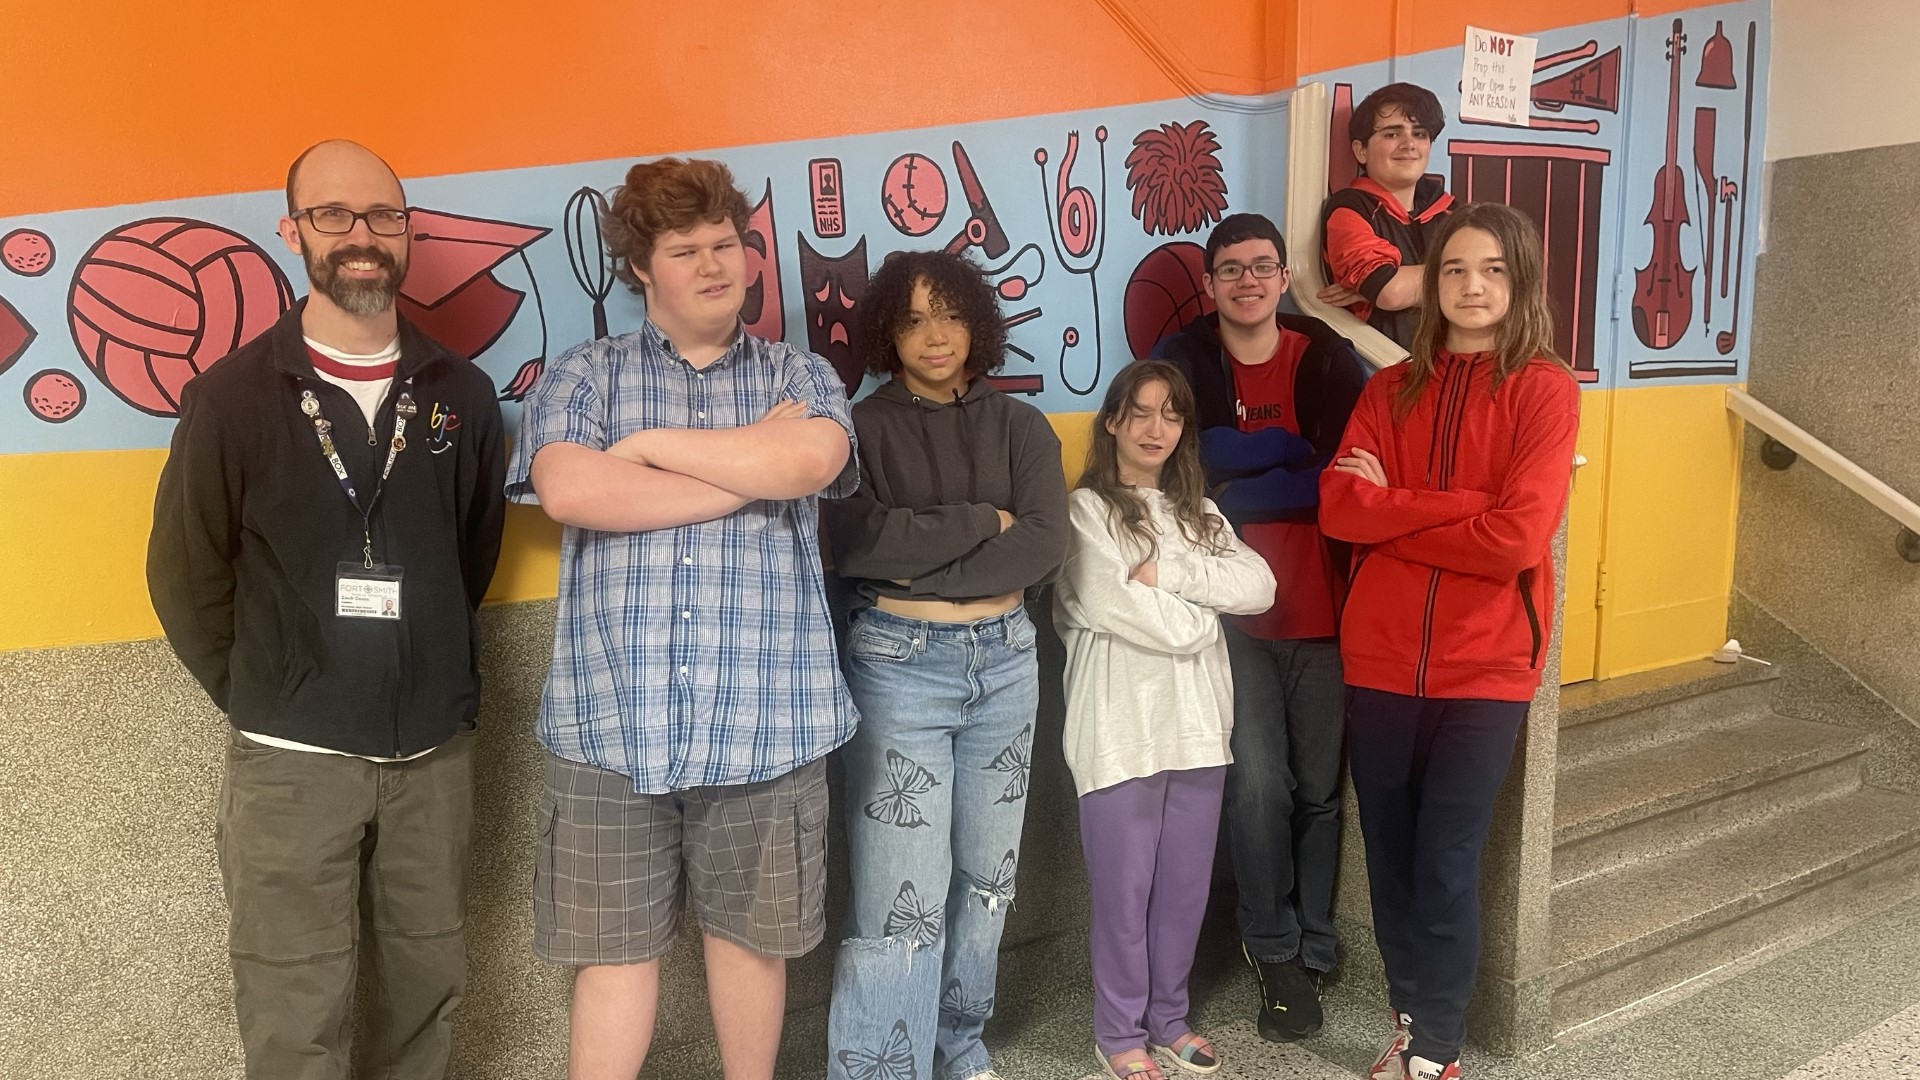 On April 25, Northside High School’s Esports team became the first high school to win the PlayVS Central Region Splatoon 3 competition in Arkansas.